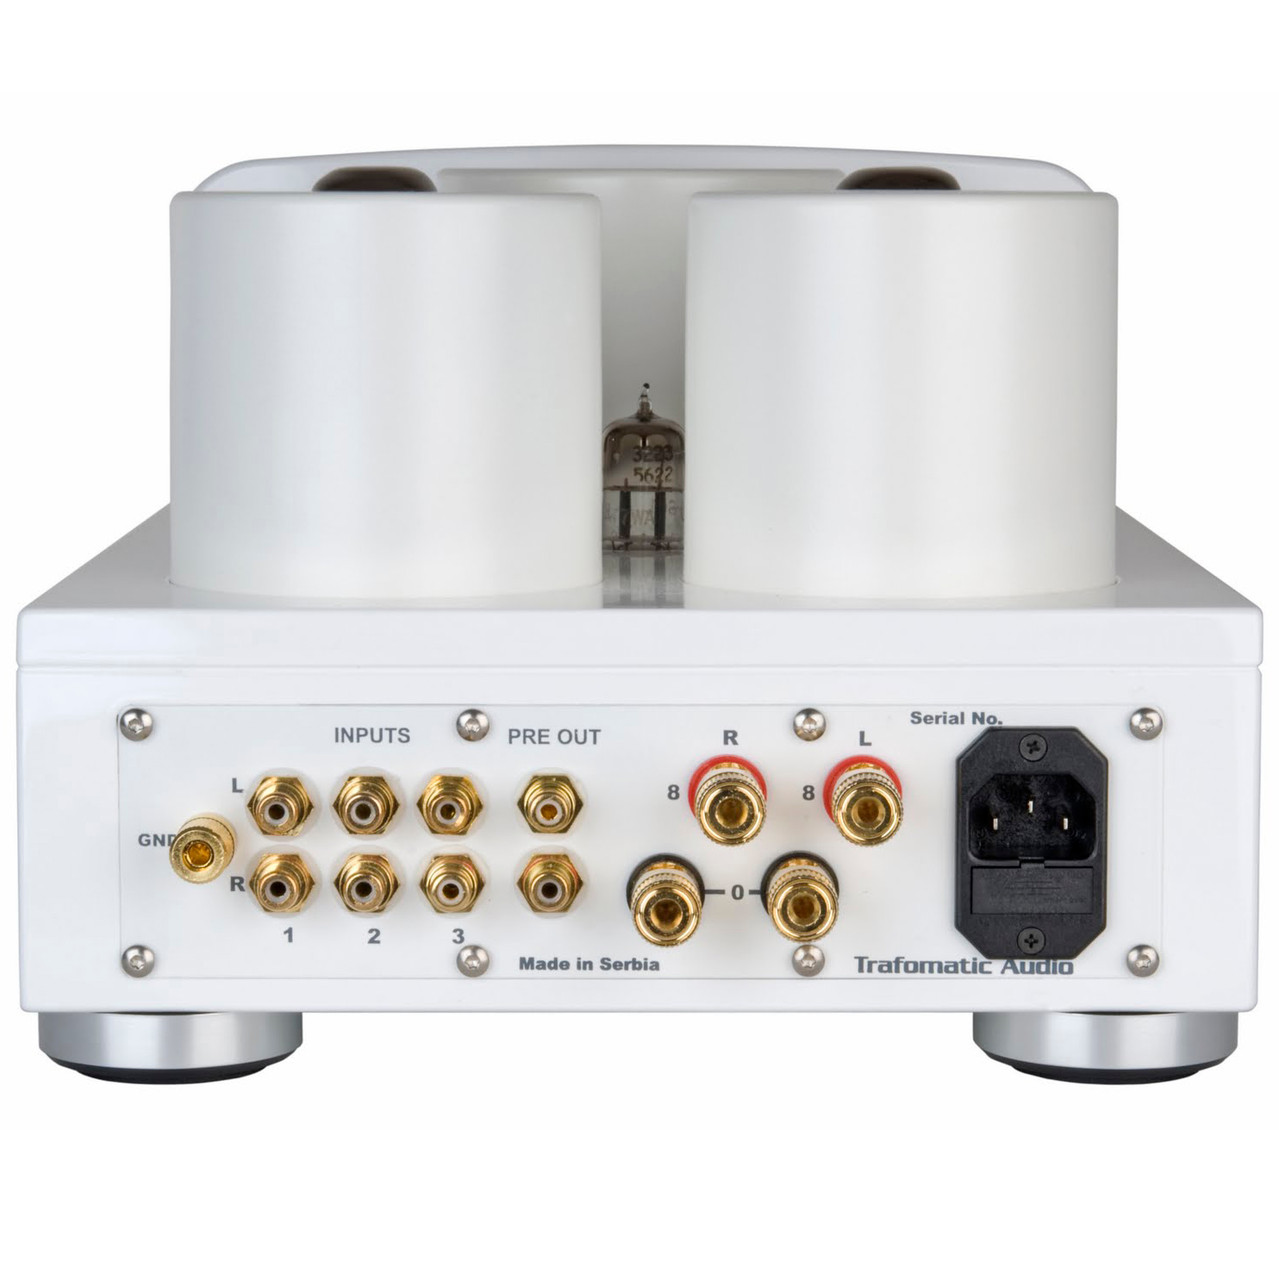 Trafomatic Aries EL34 integrated amplifier